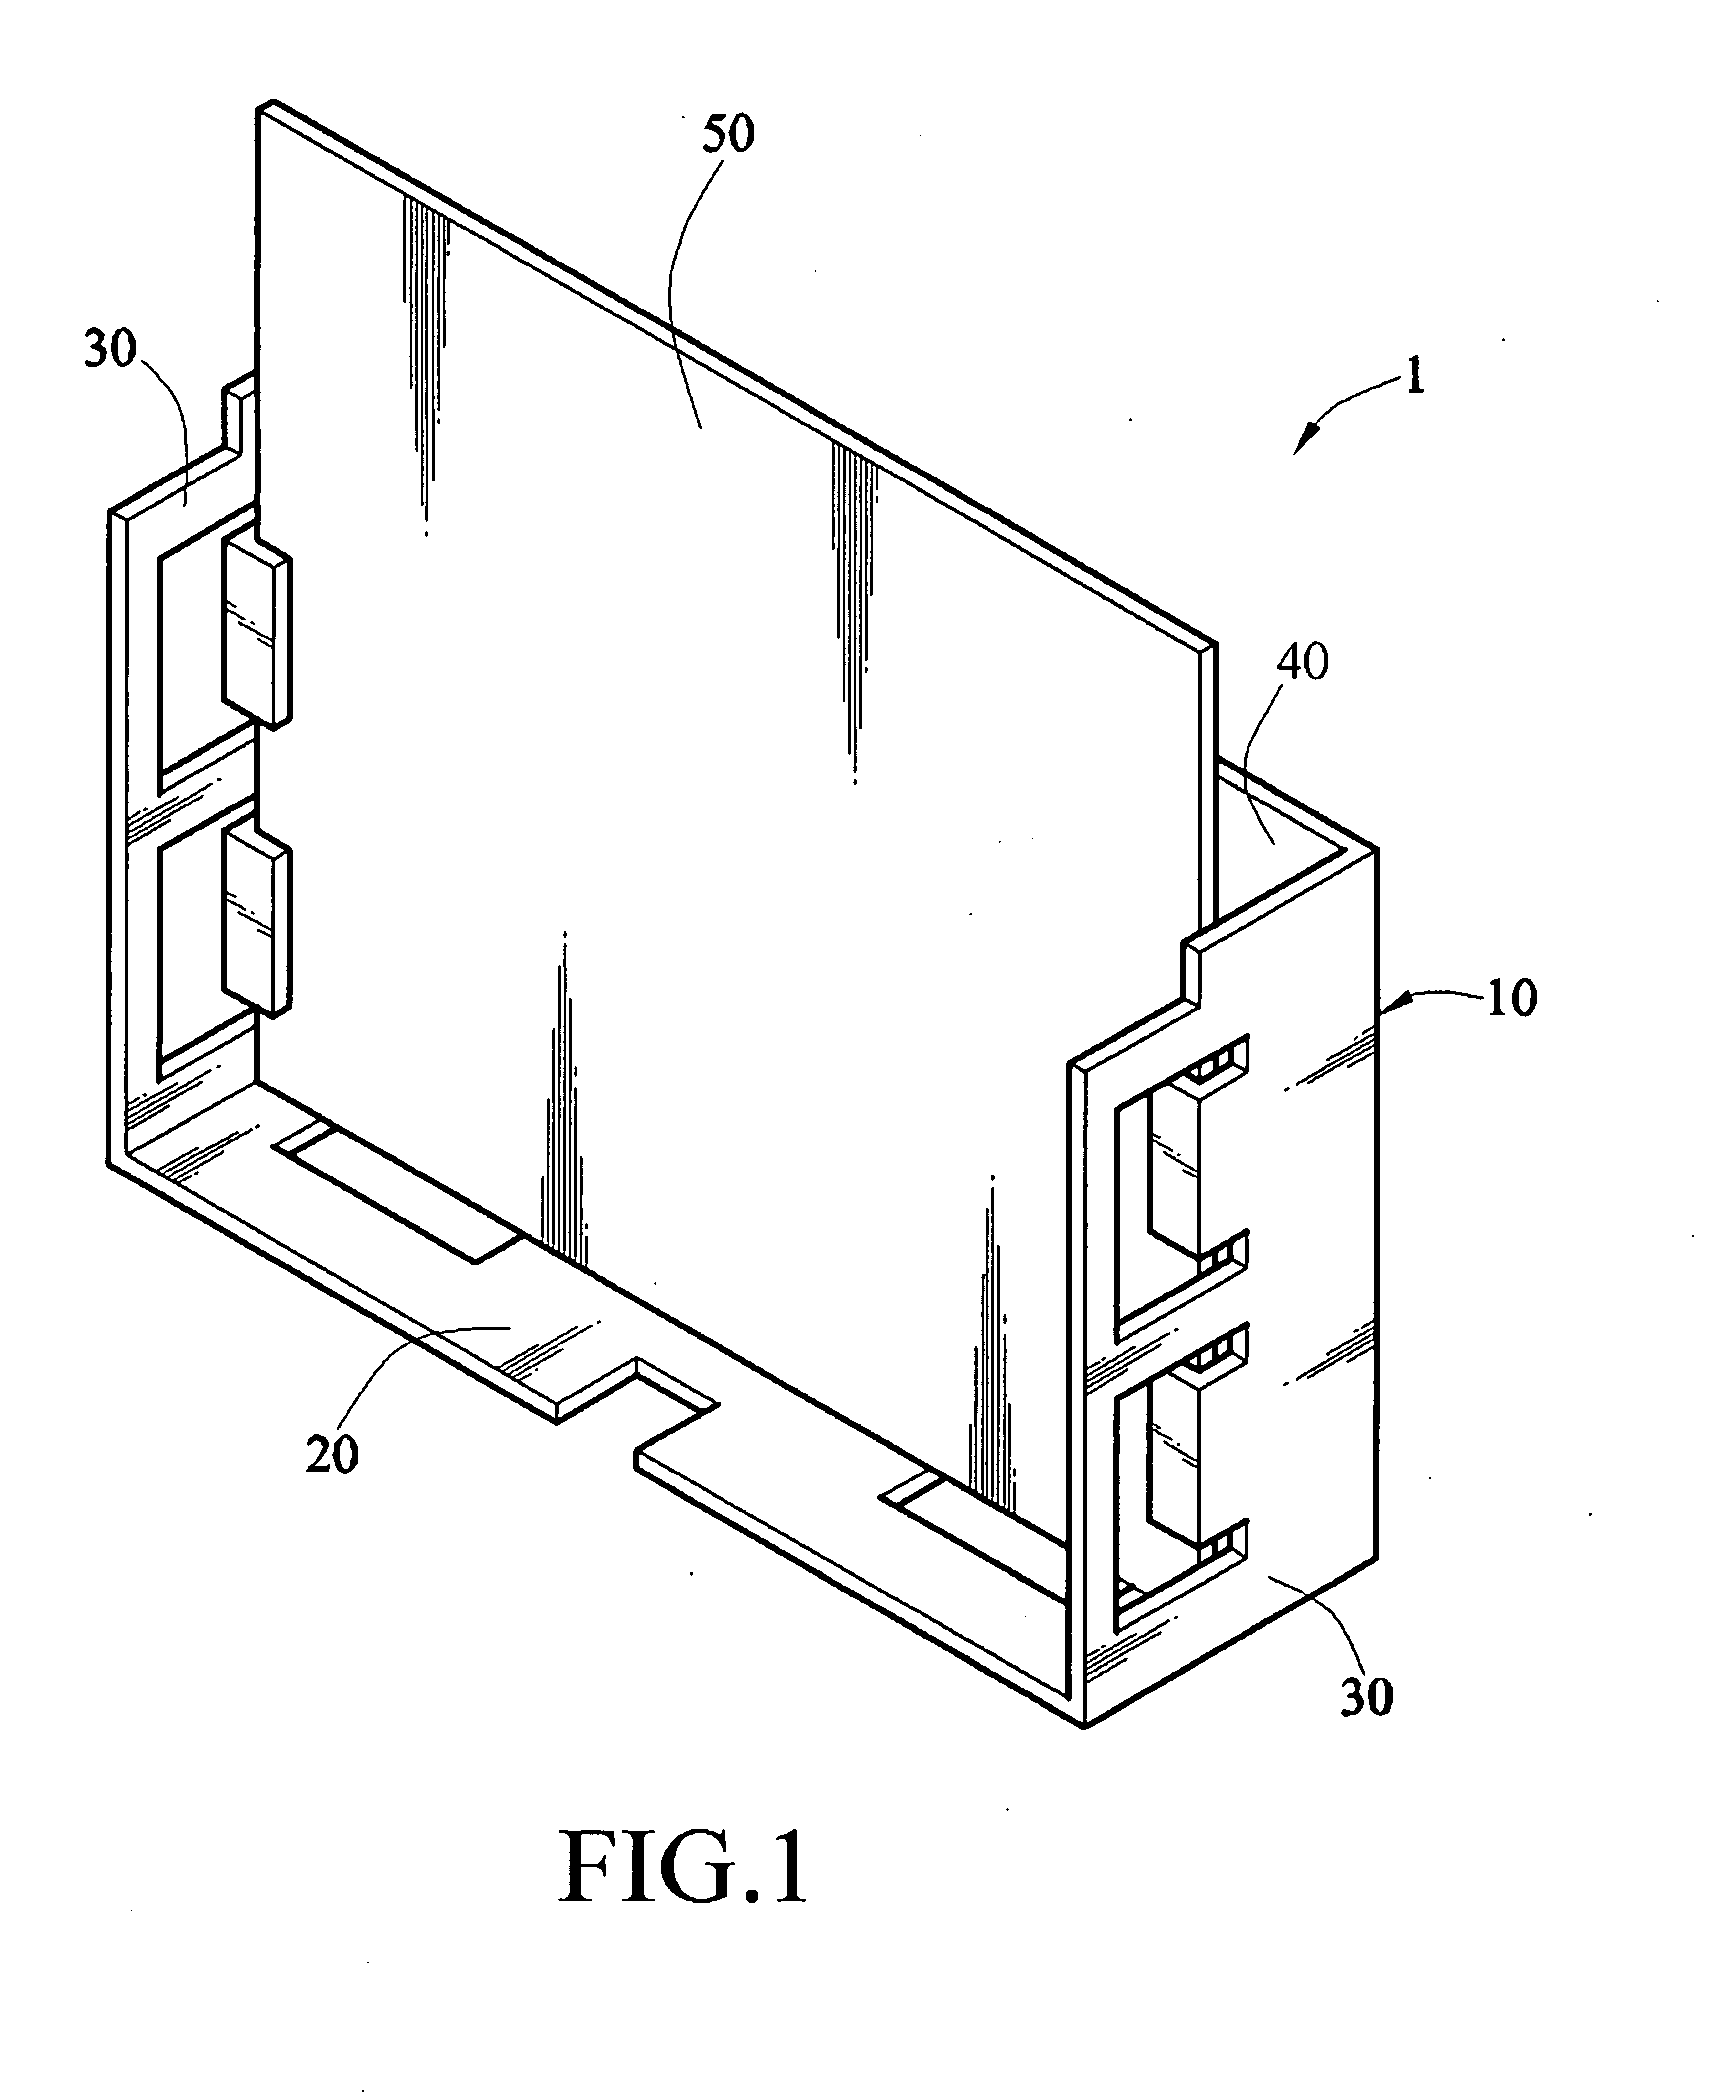 Device for retaining a printed circuit board